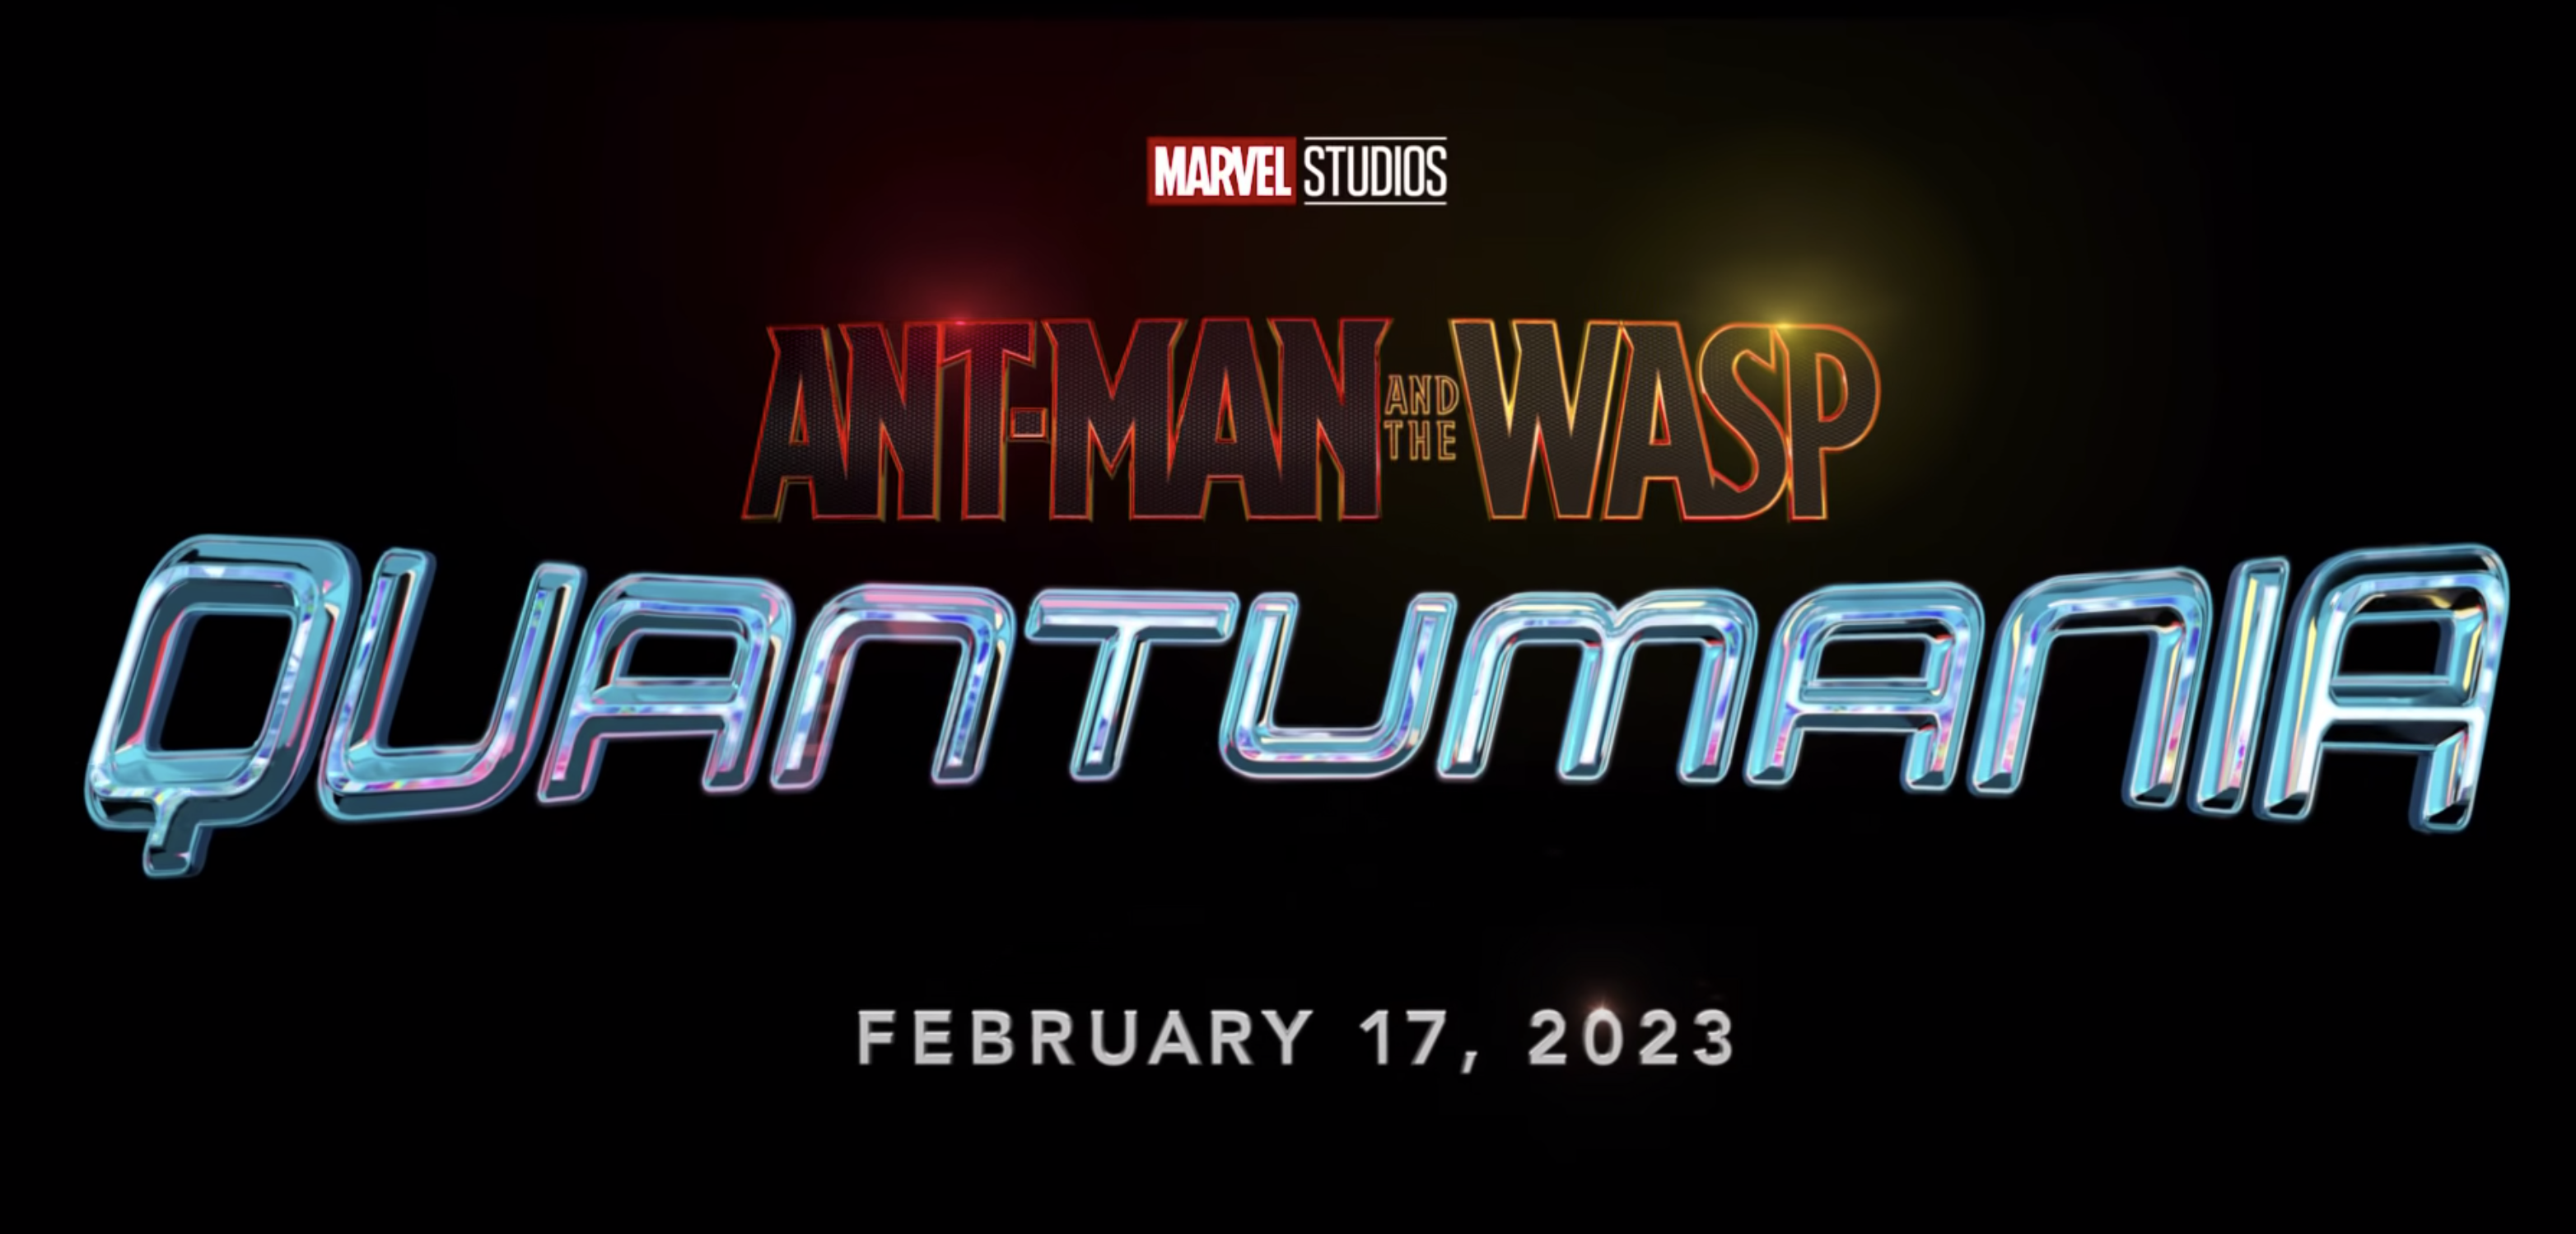 The logo for Ant-Man and the Wasp Quantumania, one of the upcoming marvel movies